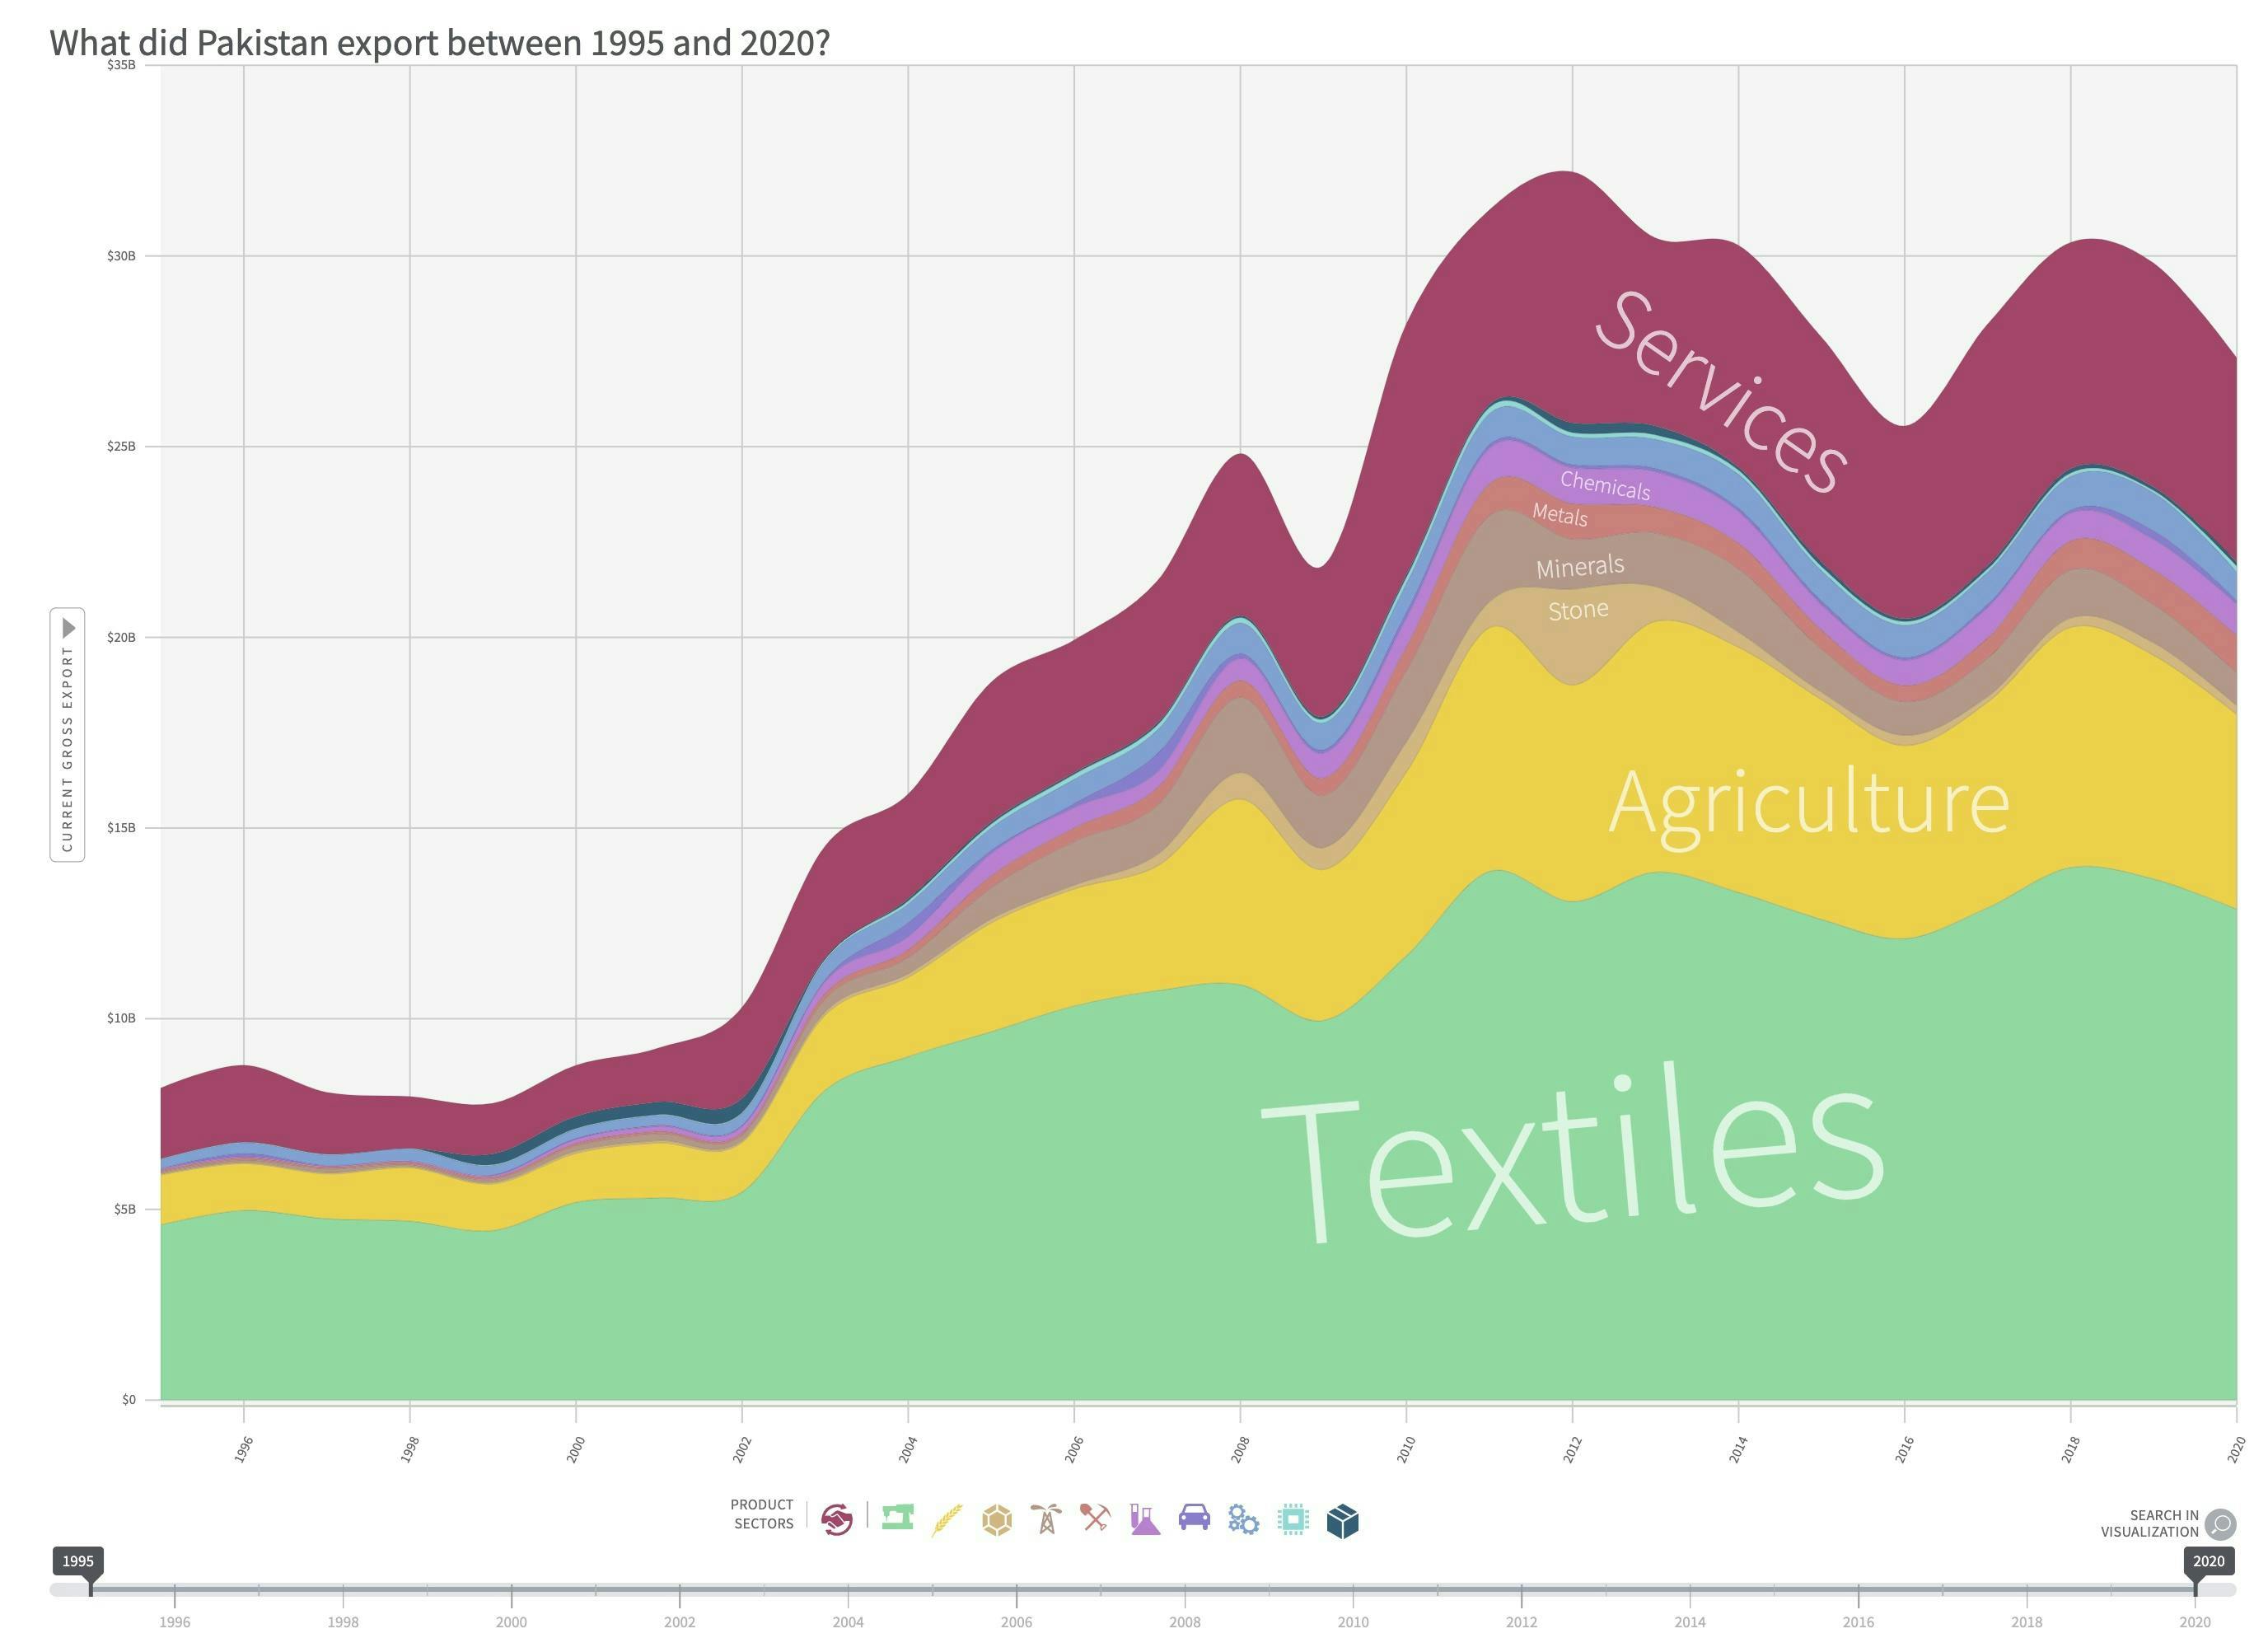 What did Pakistan export between 1995 and 2020? Top 3: Textiles, agriculture, services